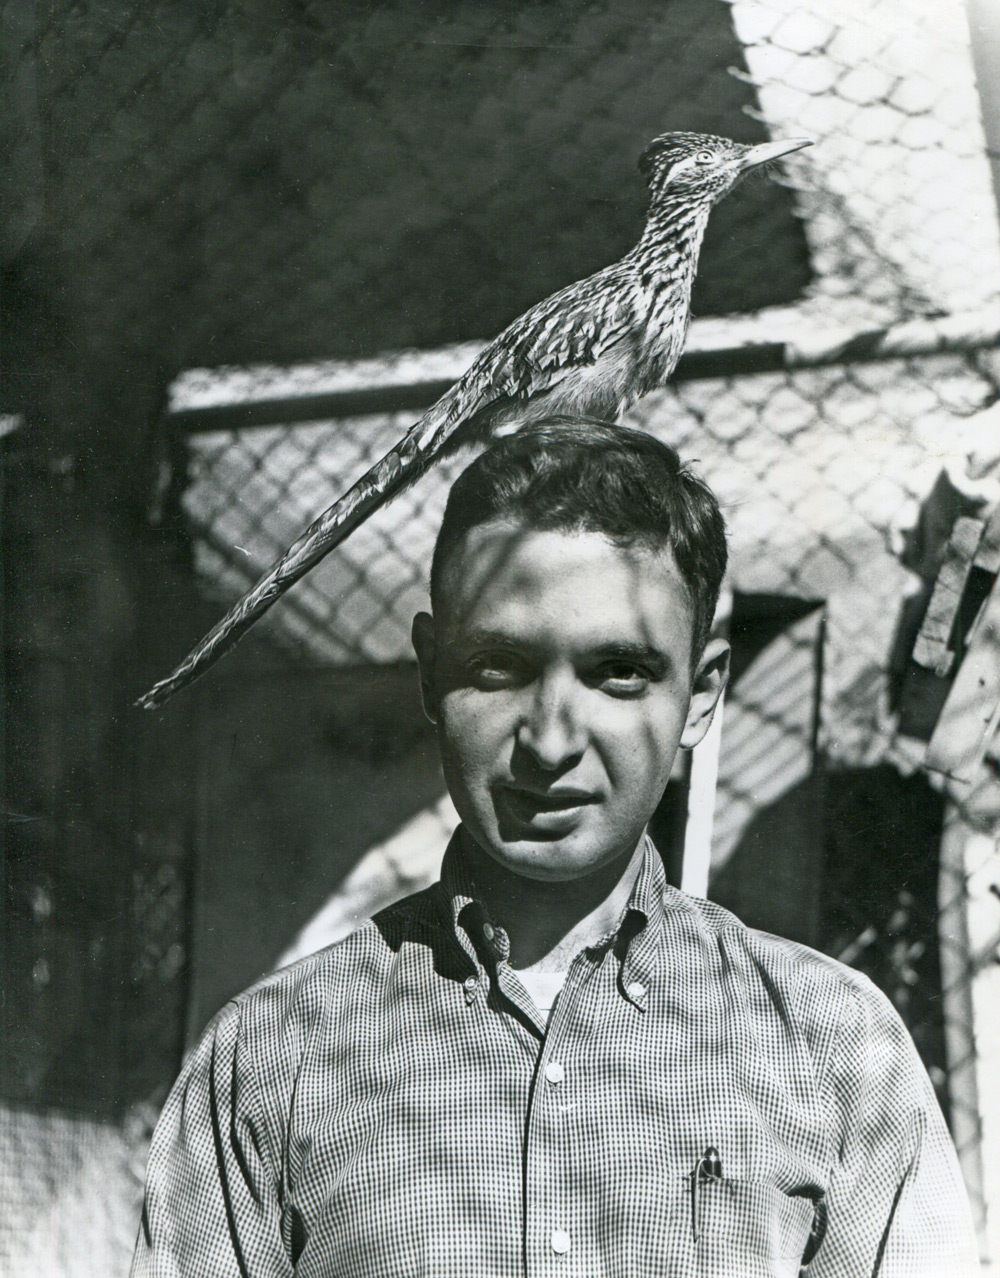 Steve Goldberg with roadrunner perched on his head